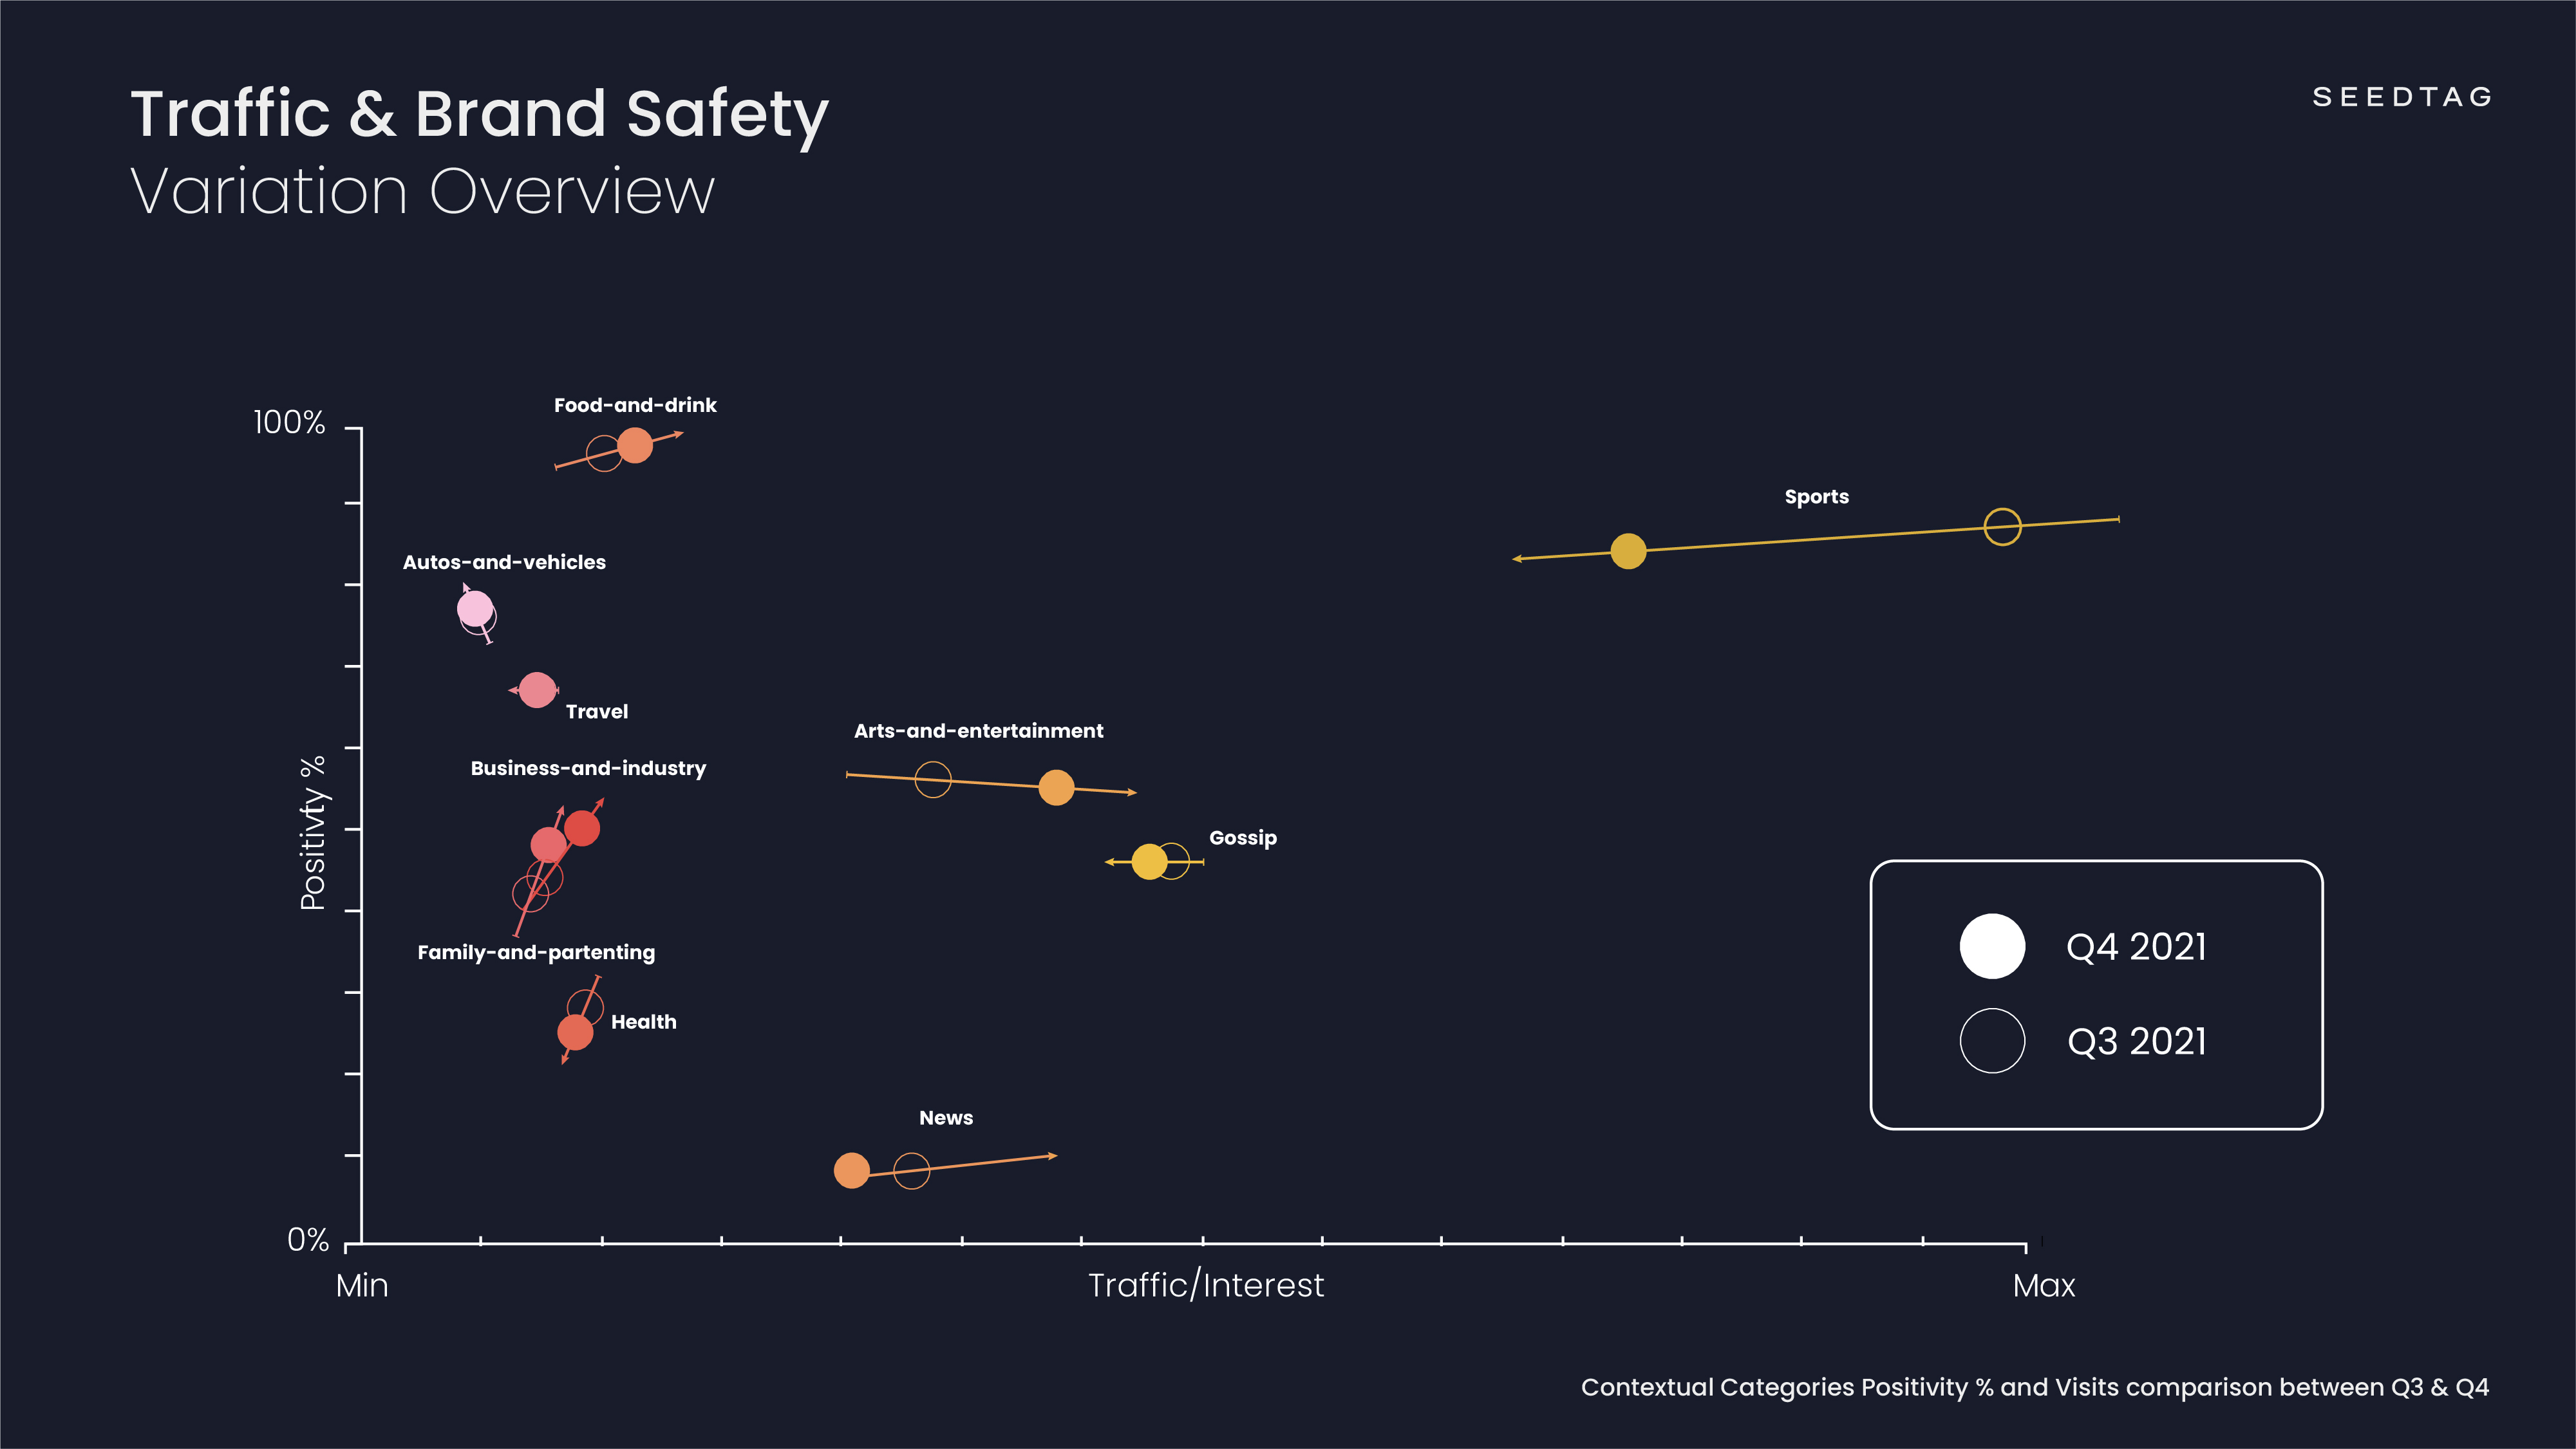 Traffic & Brand Safety overview